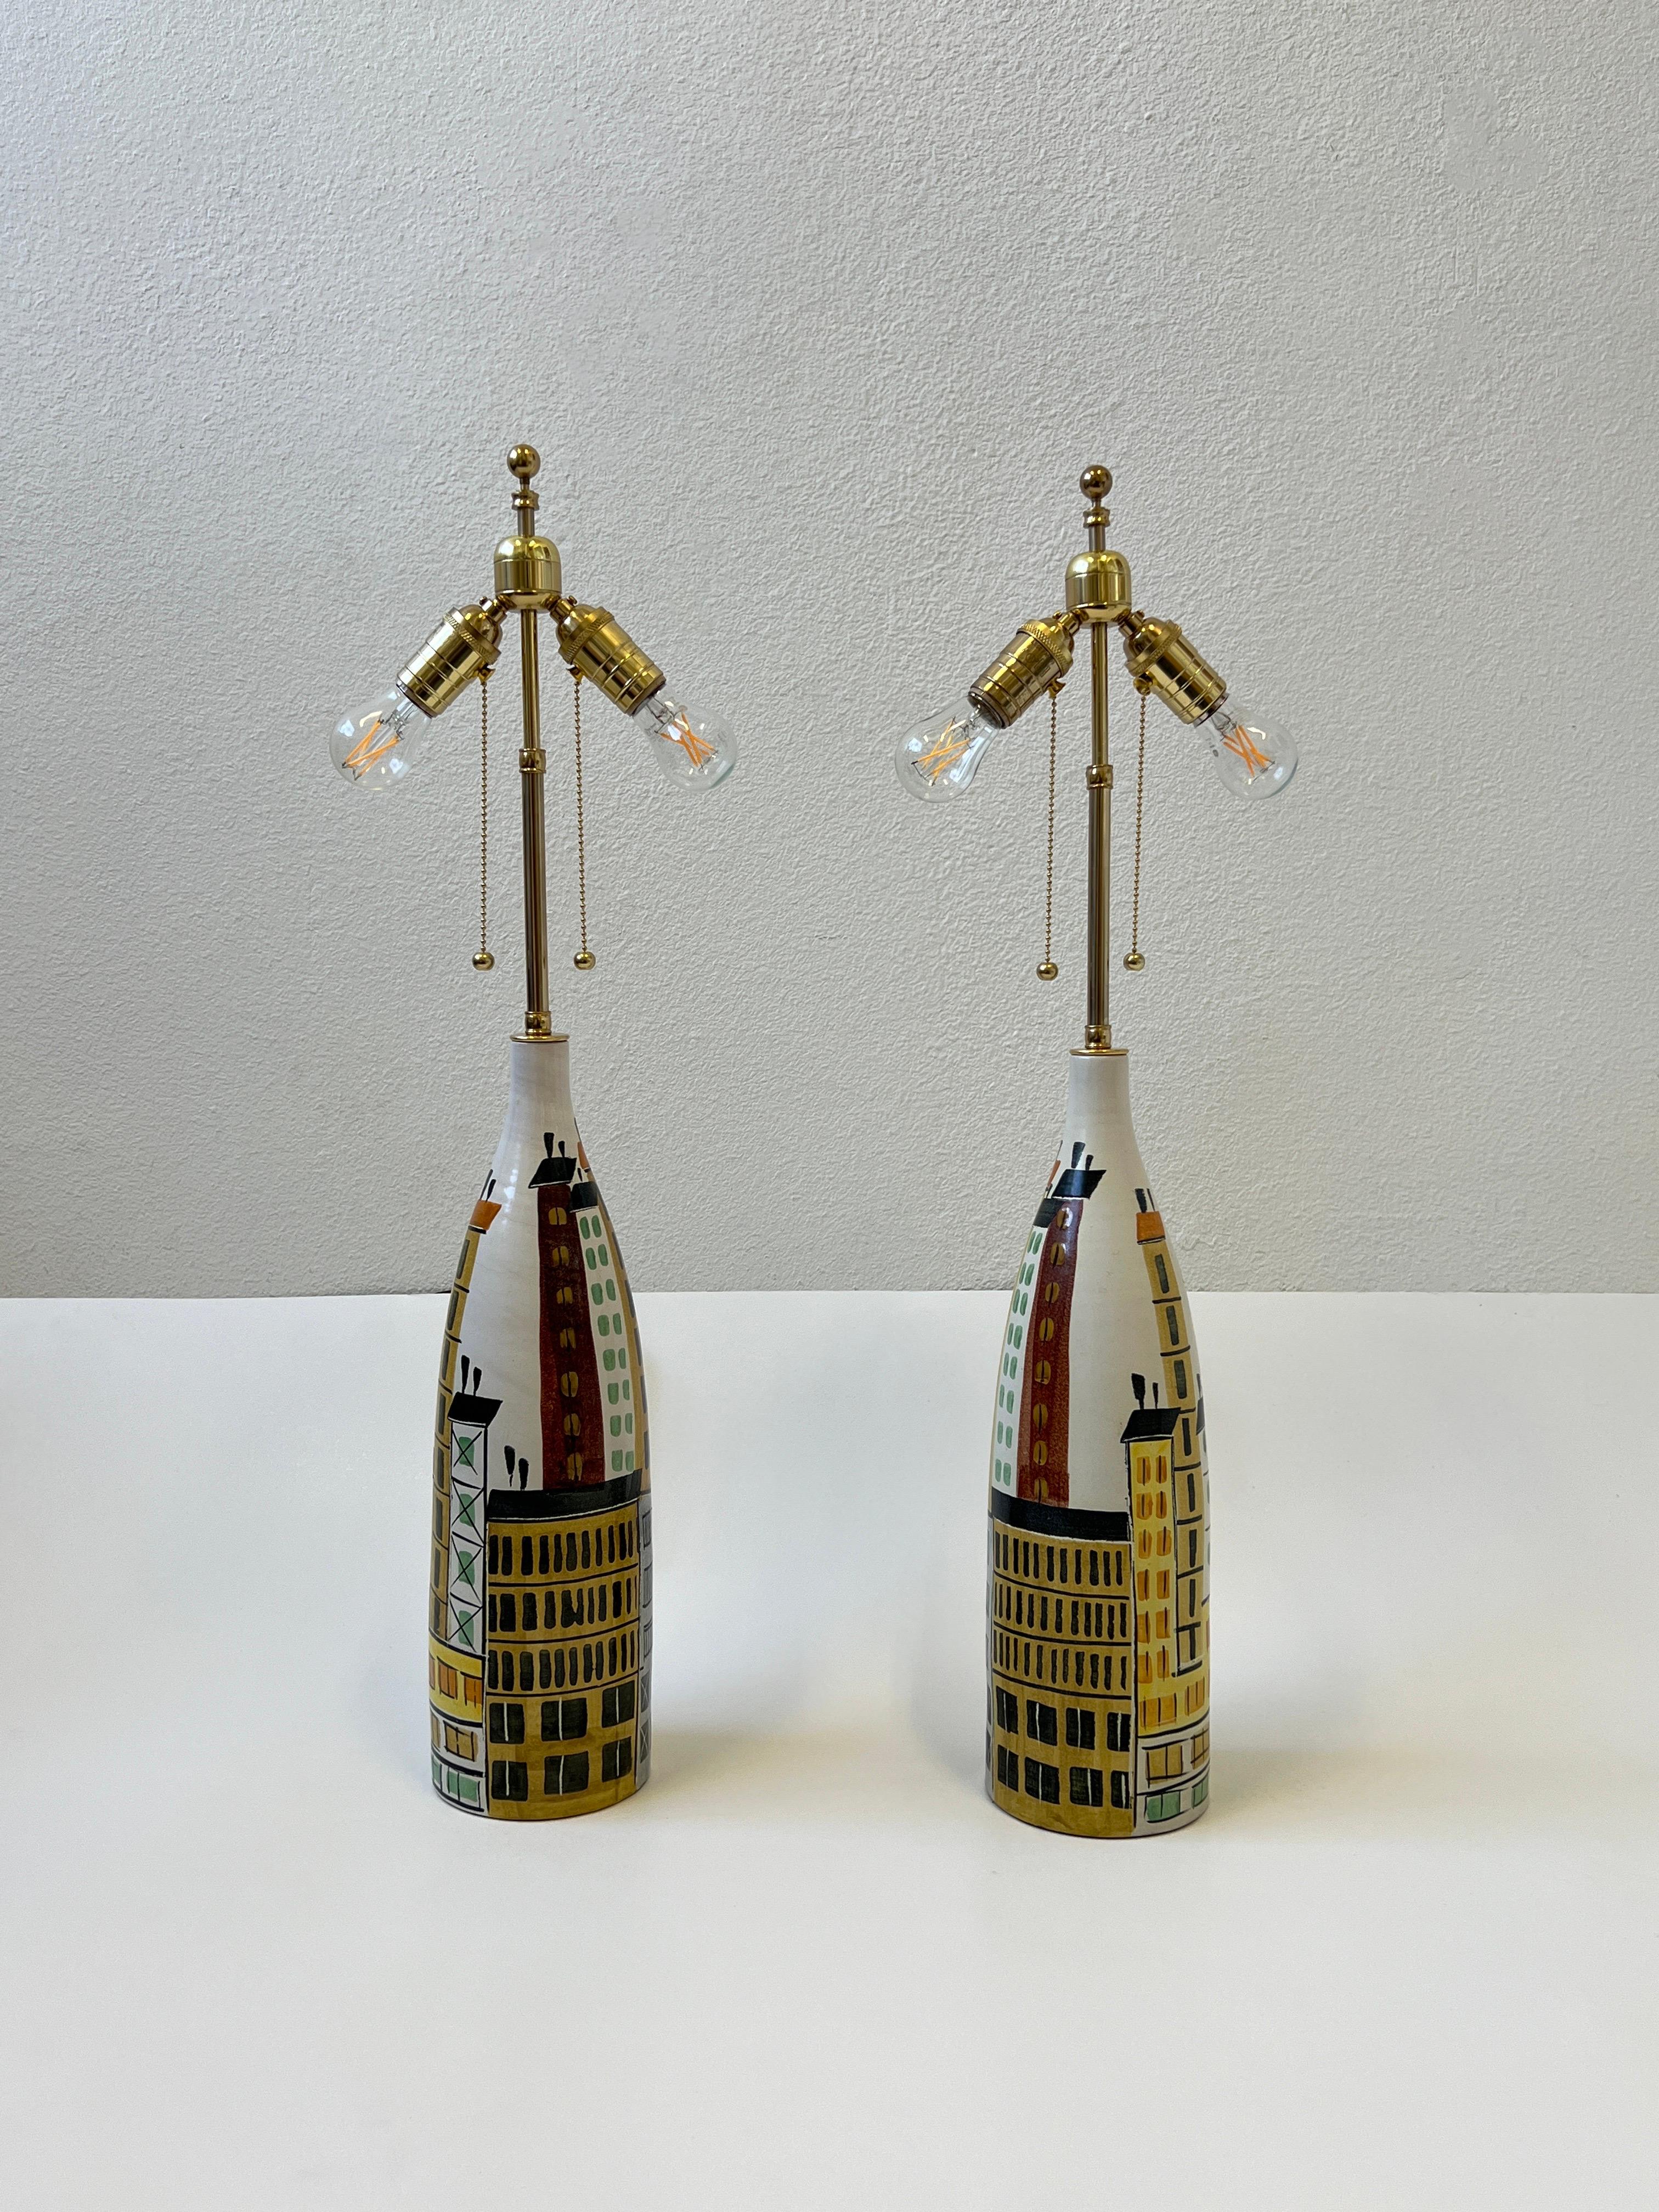 1960’s Italian ceramic and brass pair of cityscape table lamps by Aldo Londi for Bitossi.
Newly rewired with solid brass two bulbs adjustable clusters, brown cloth wrapped cord and new vanilla linen shades. The bases are marked made in Italy.